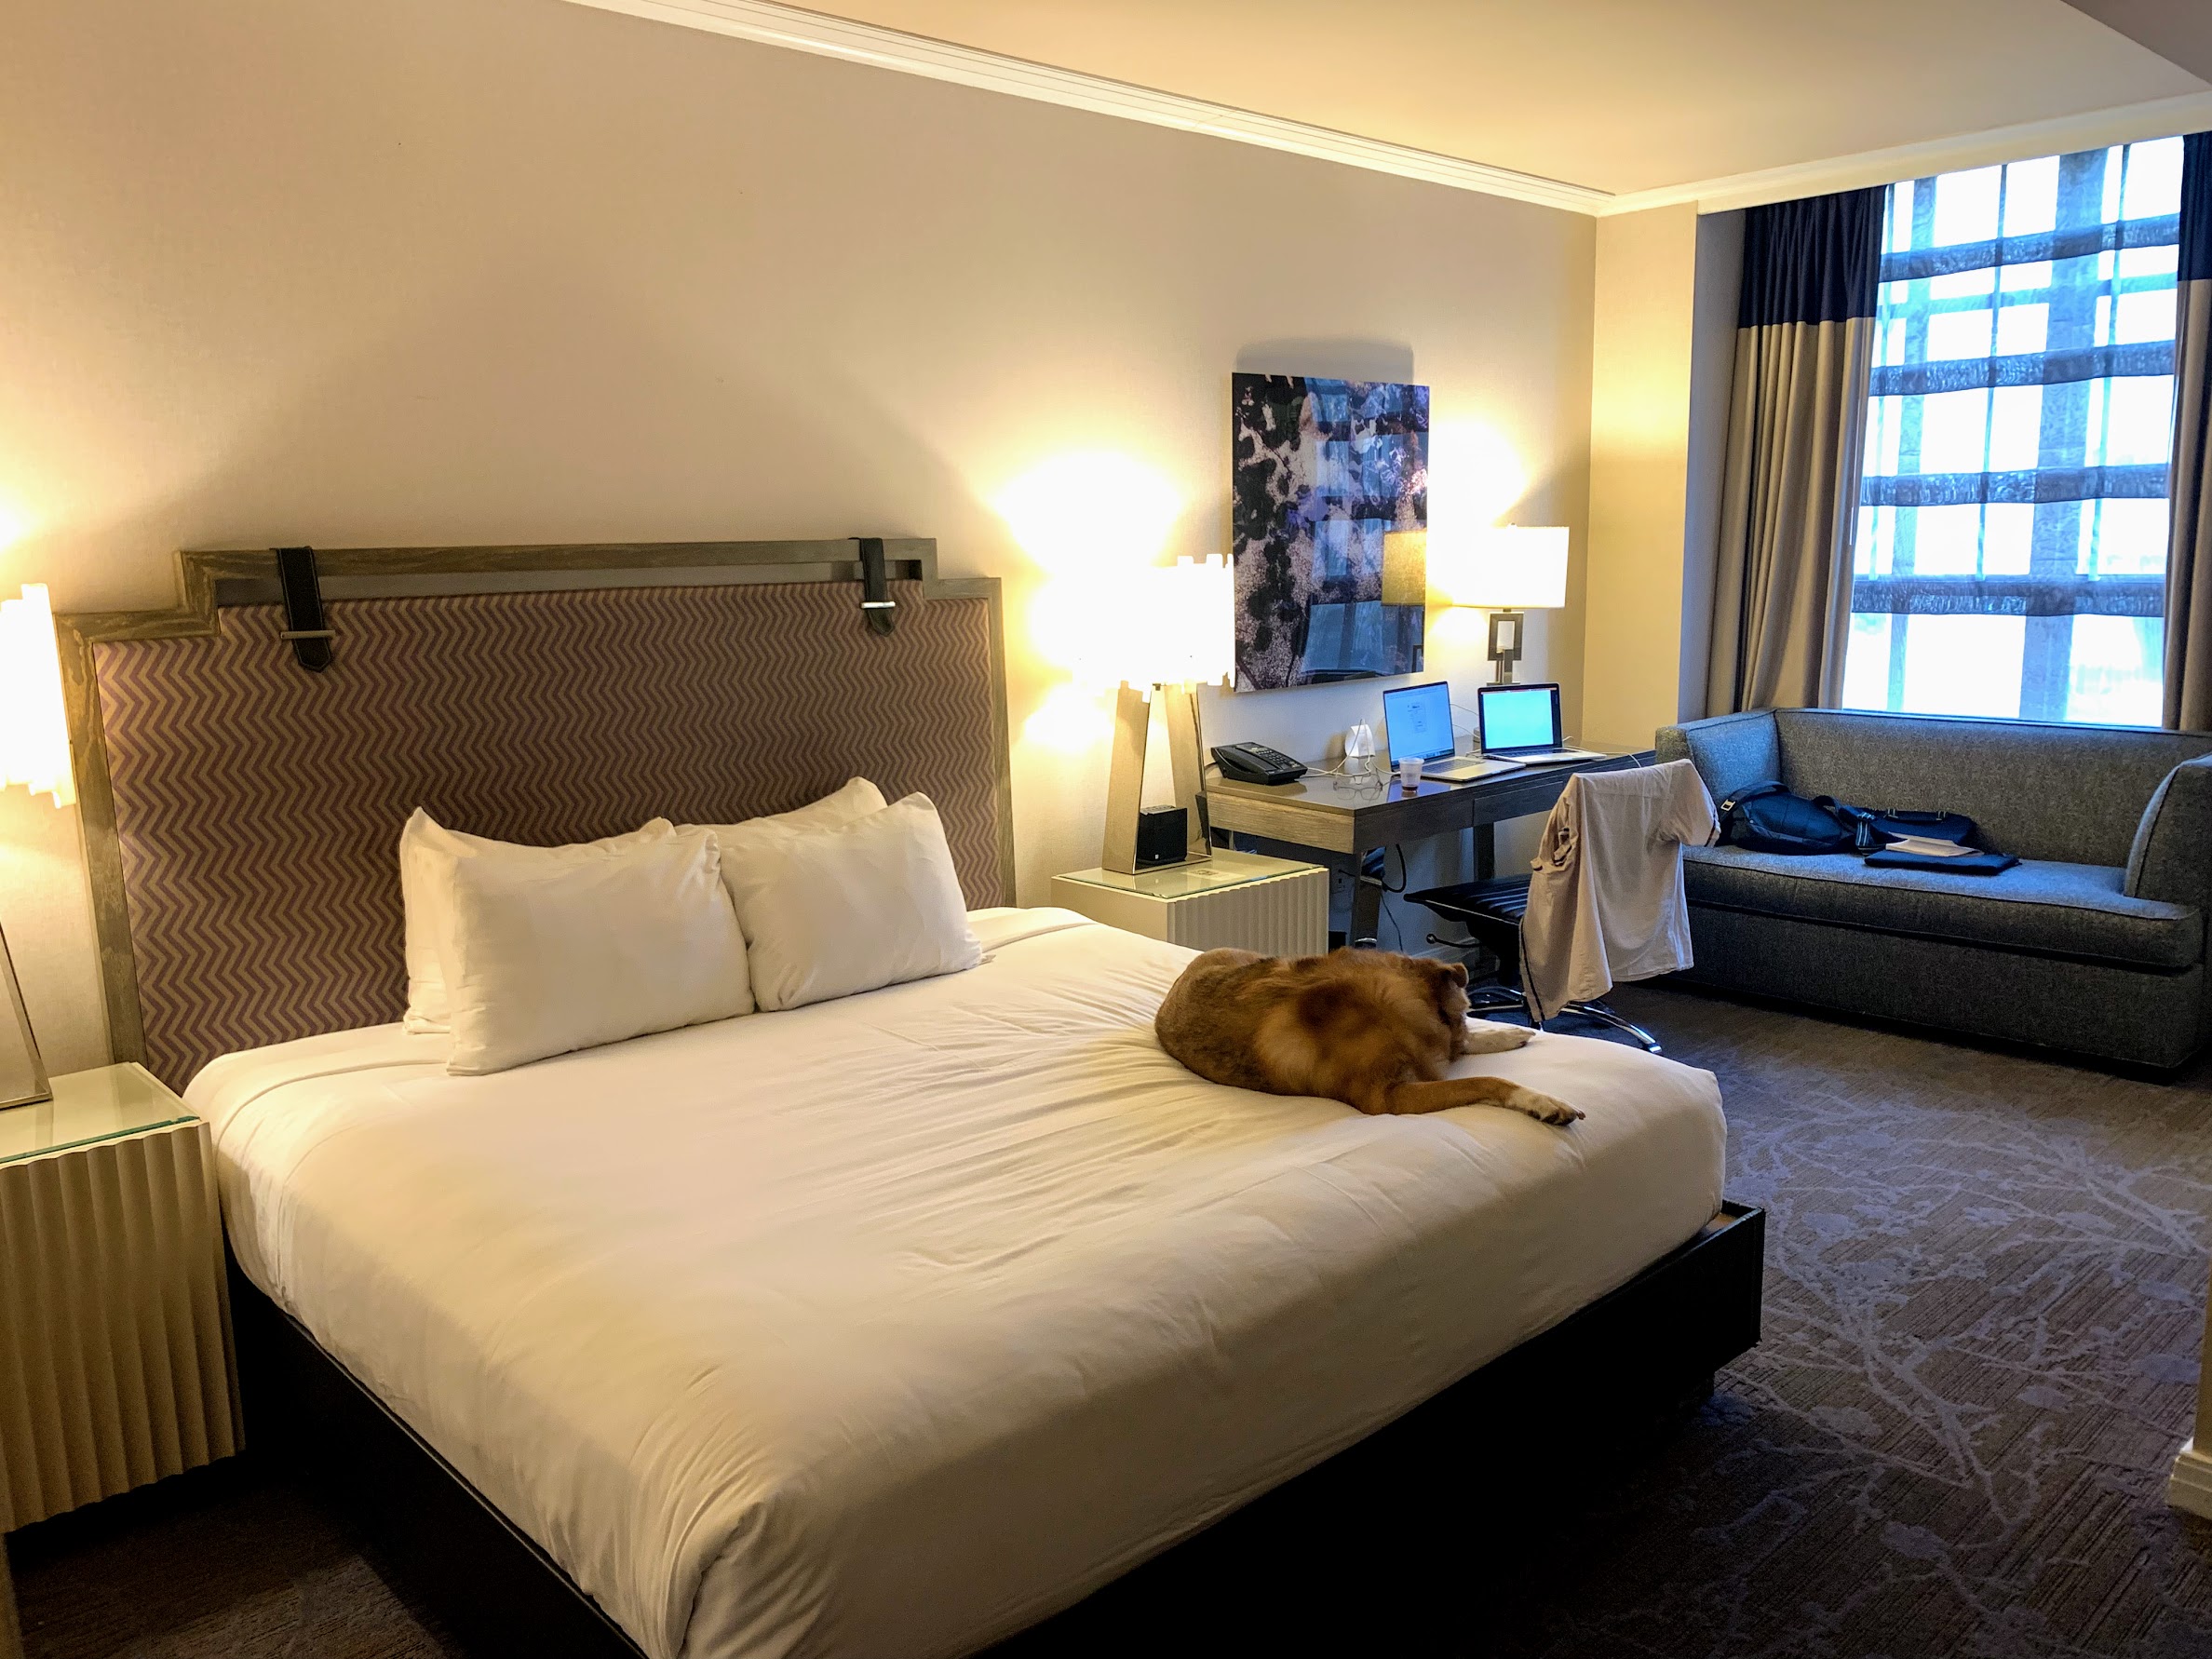 a dog lying on a bed in a hotel room